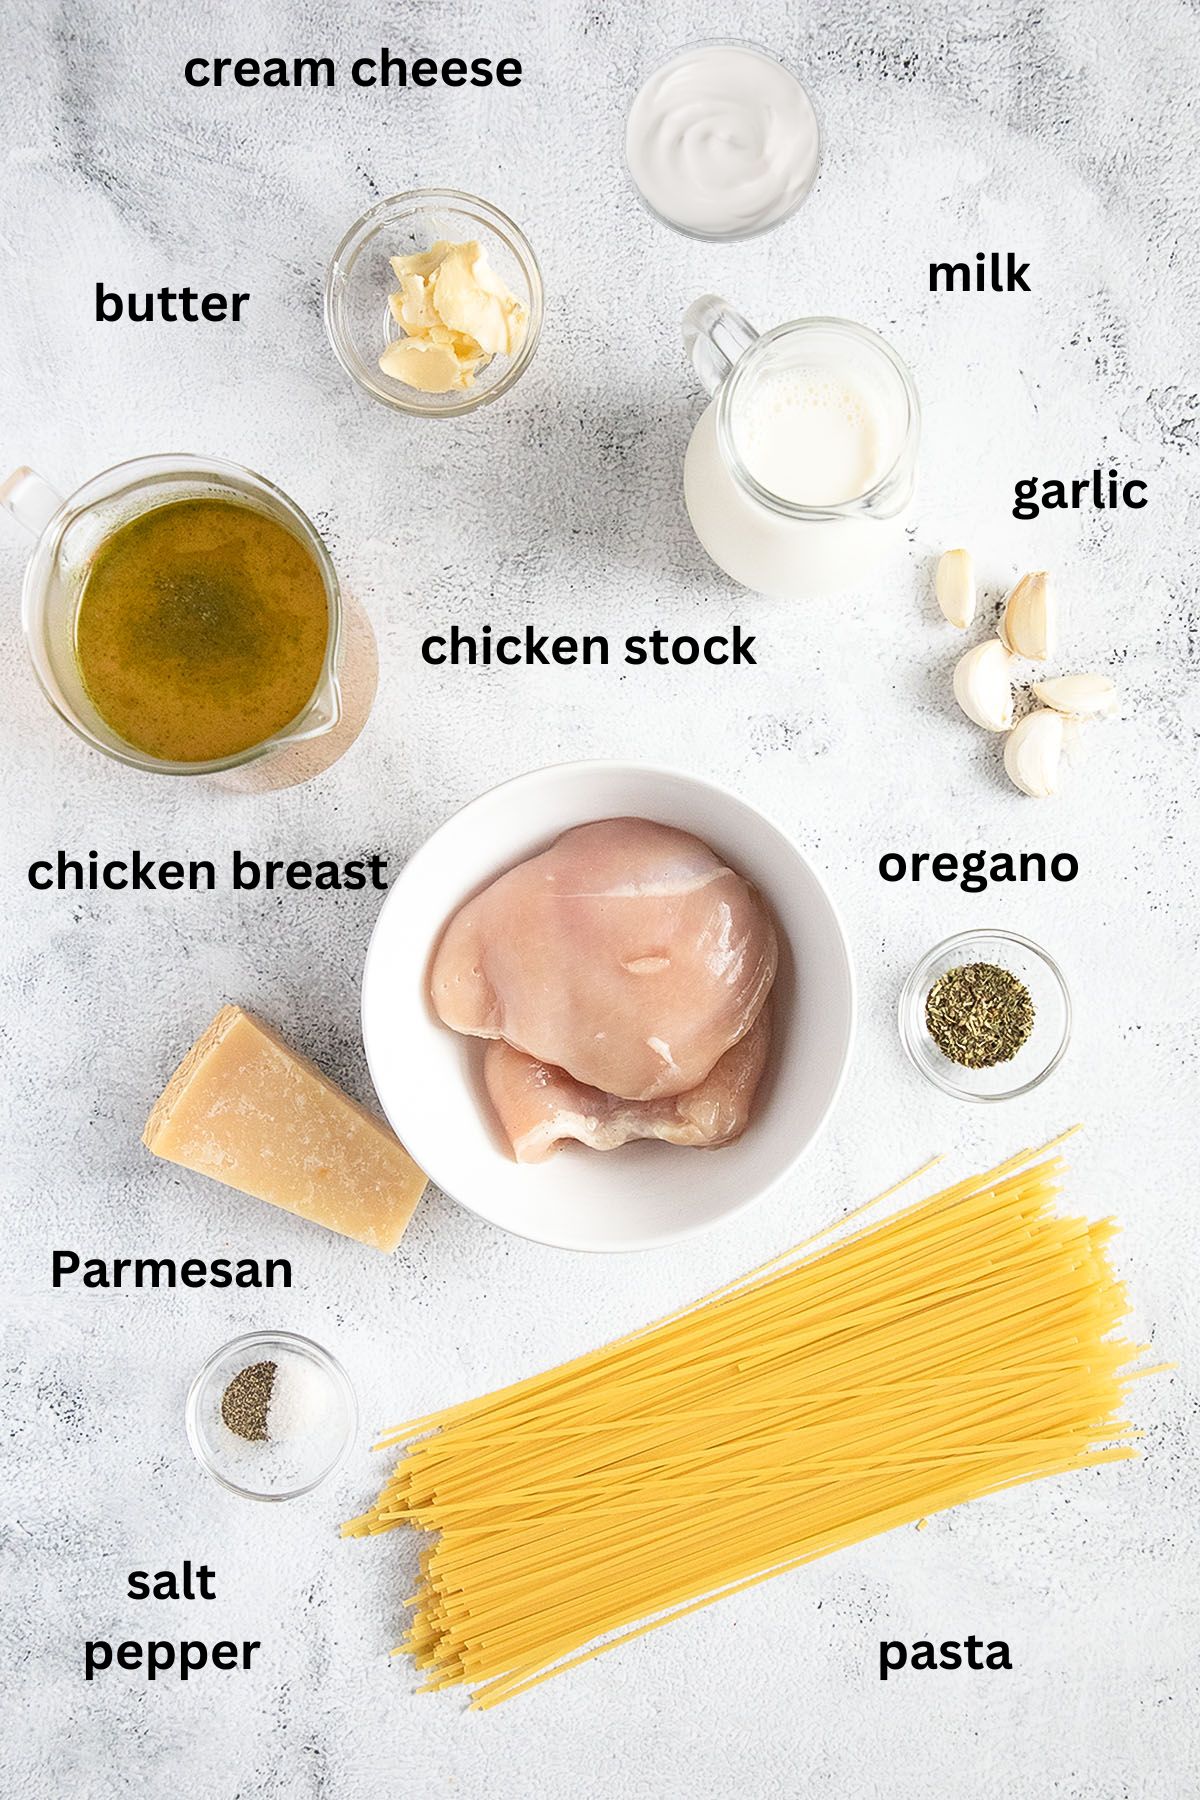 listed ingredients for making fettuccine with garlic, chicken, parmesan in one pot.